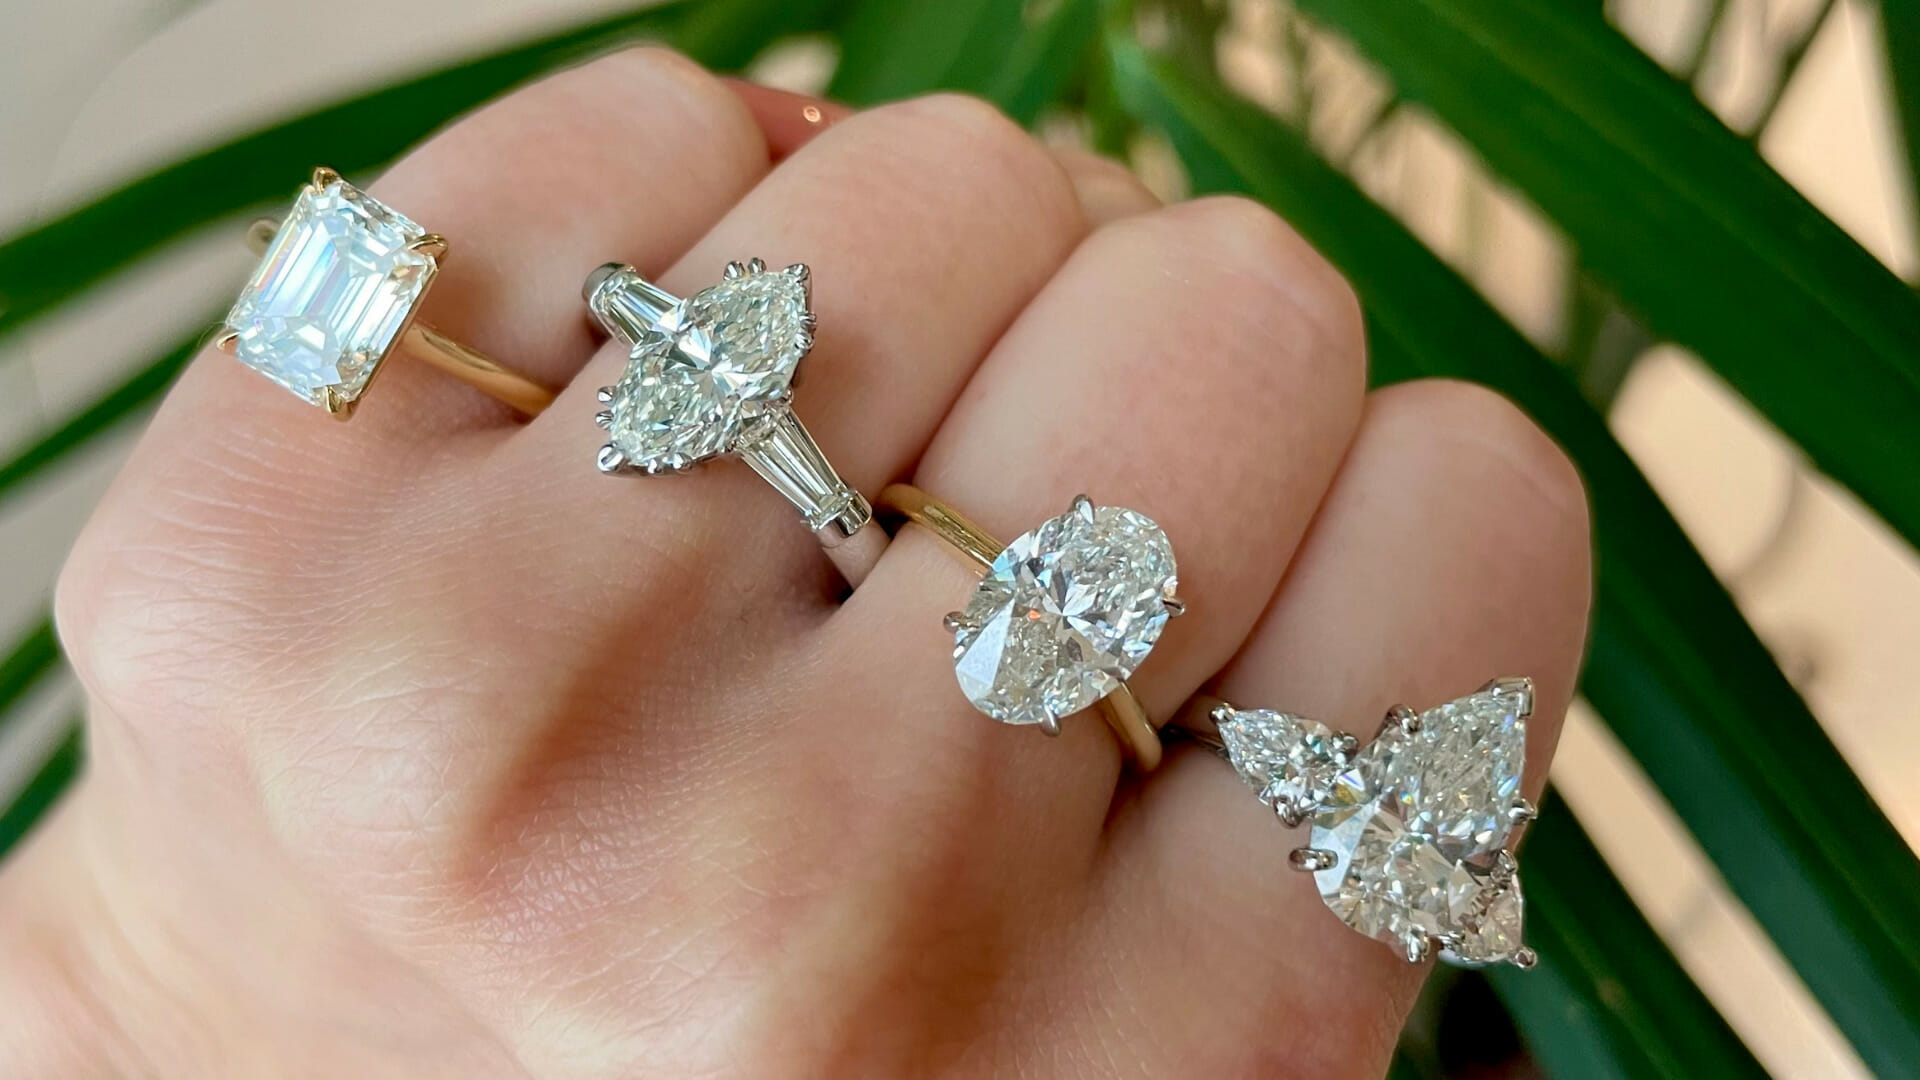 Designing Forever: Crafting Your Dream Engagement Ring